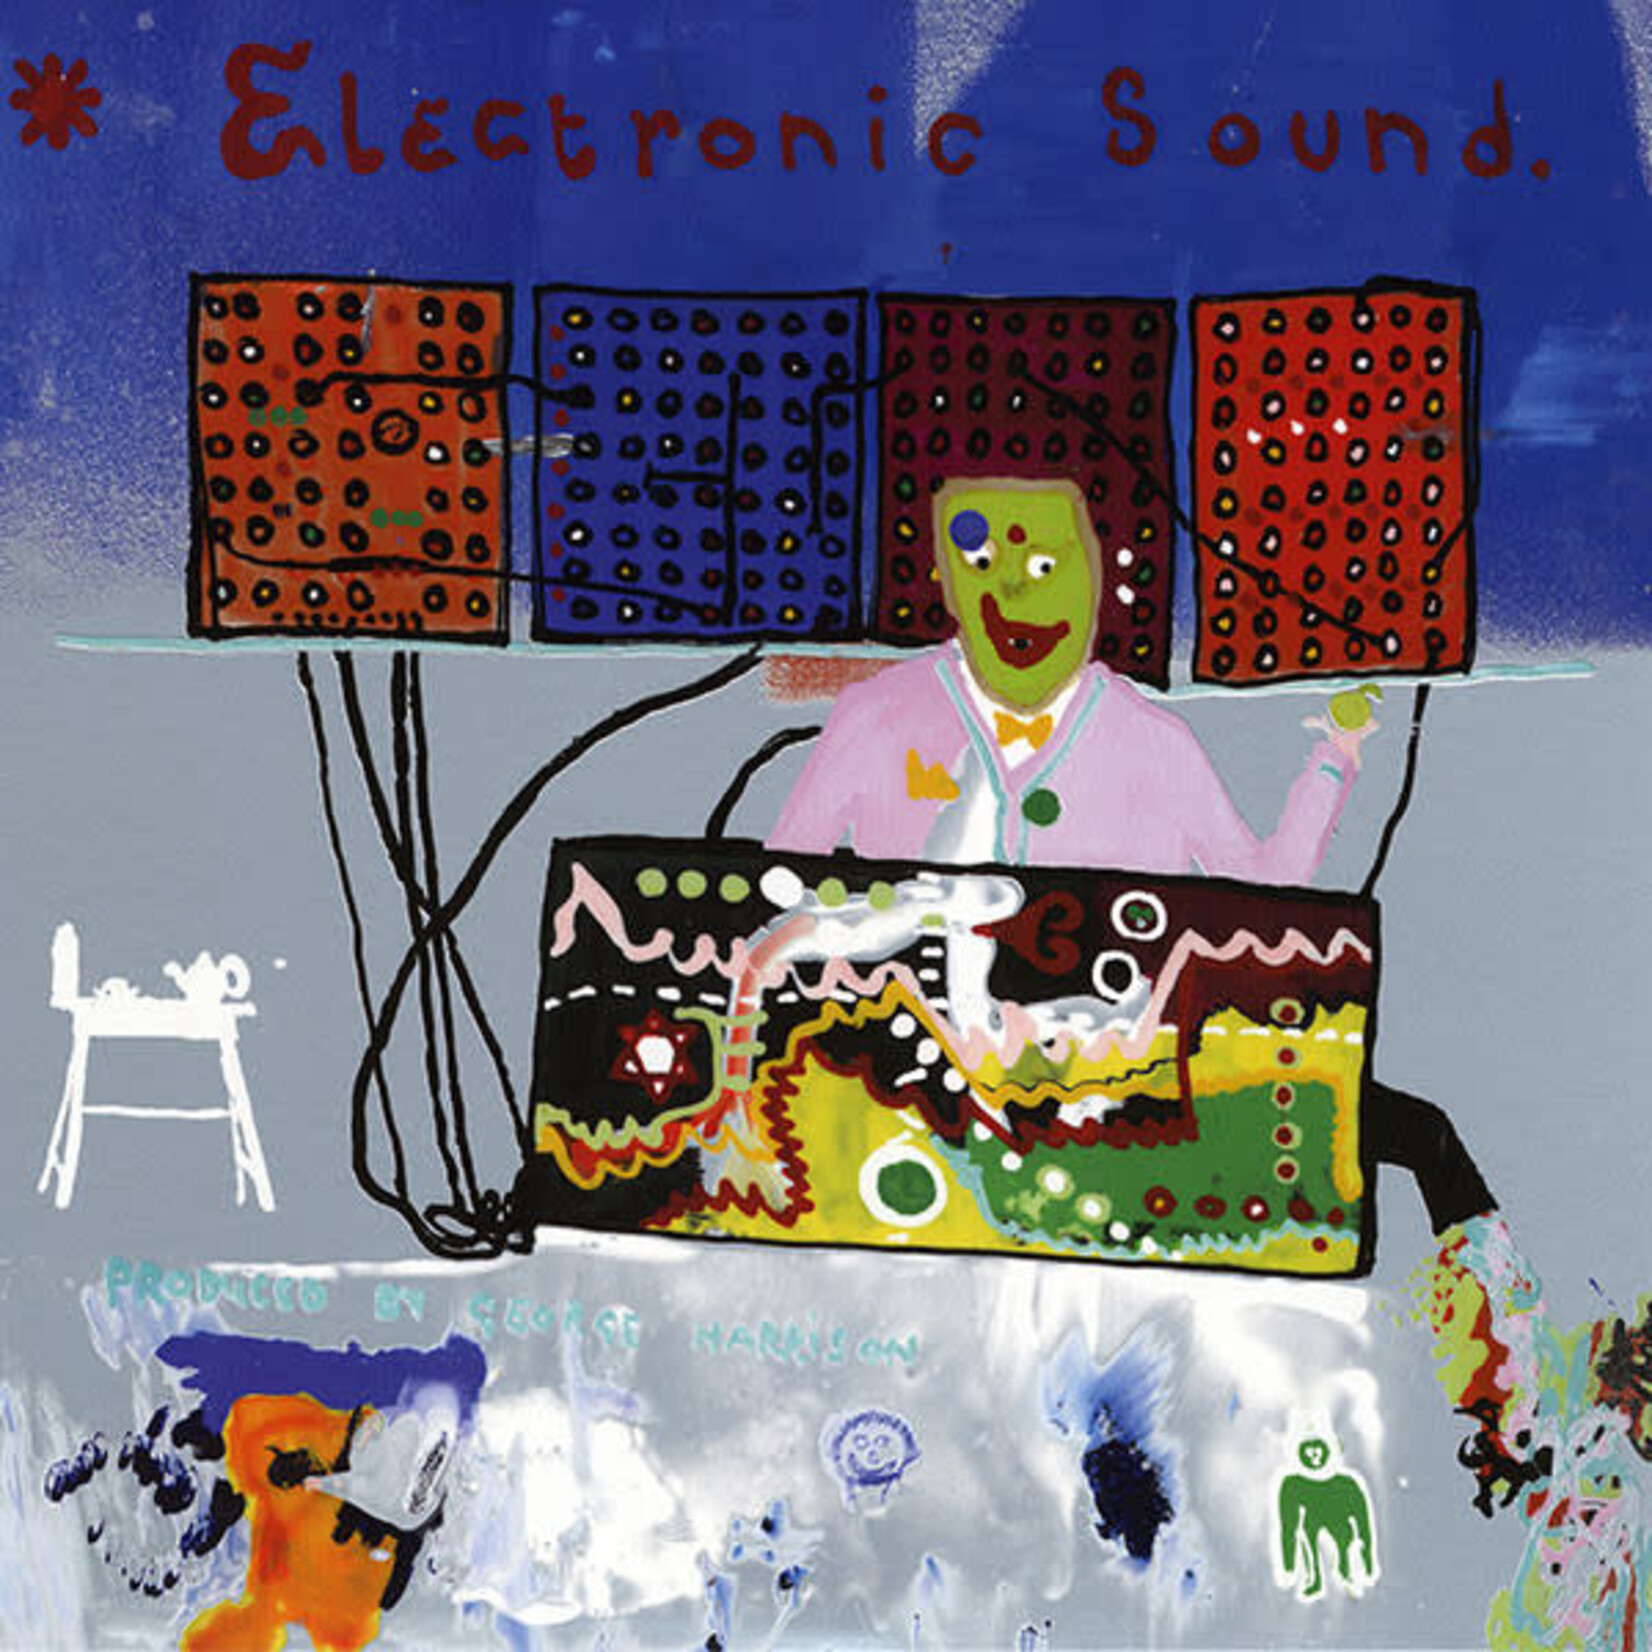 [New] Harrison, George: Electronic Sound [BMG]